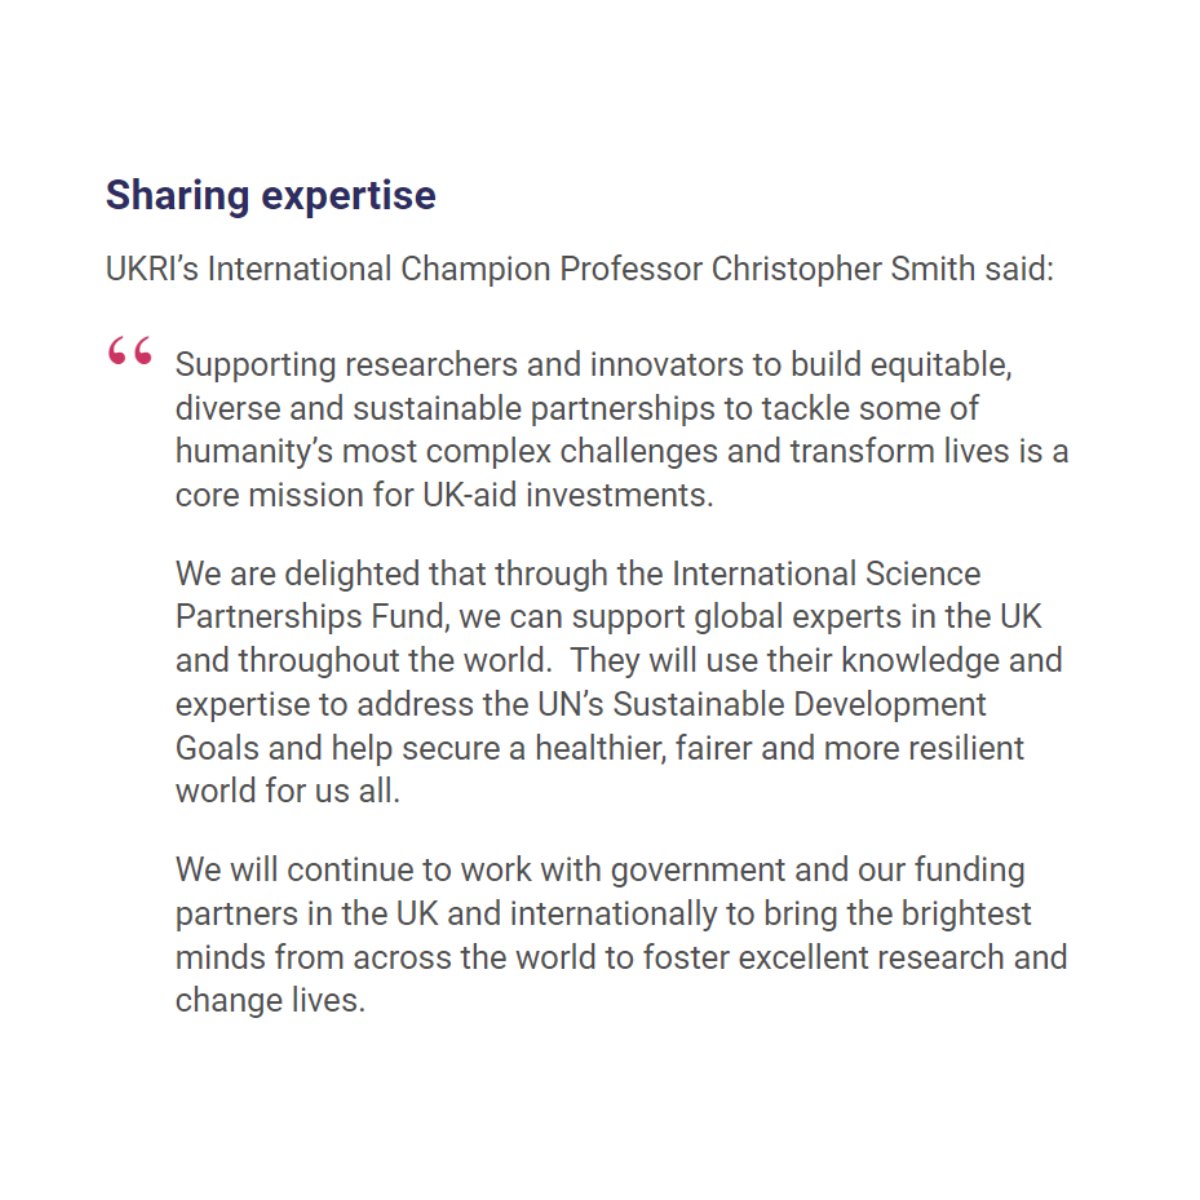 A new £42M Official Development Assistance (ODA) investment through @SciTechgovuk's ISPF will enable international research partnerships across Africa, South-east Asia and the UK to address challenges incl: 🦠 Disease prevention 💧Sustainable aquaculture orlo.uk/AejvM